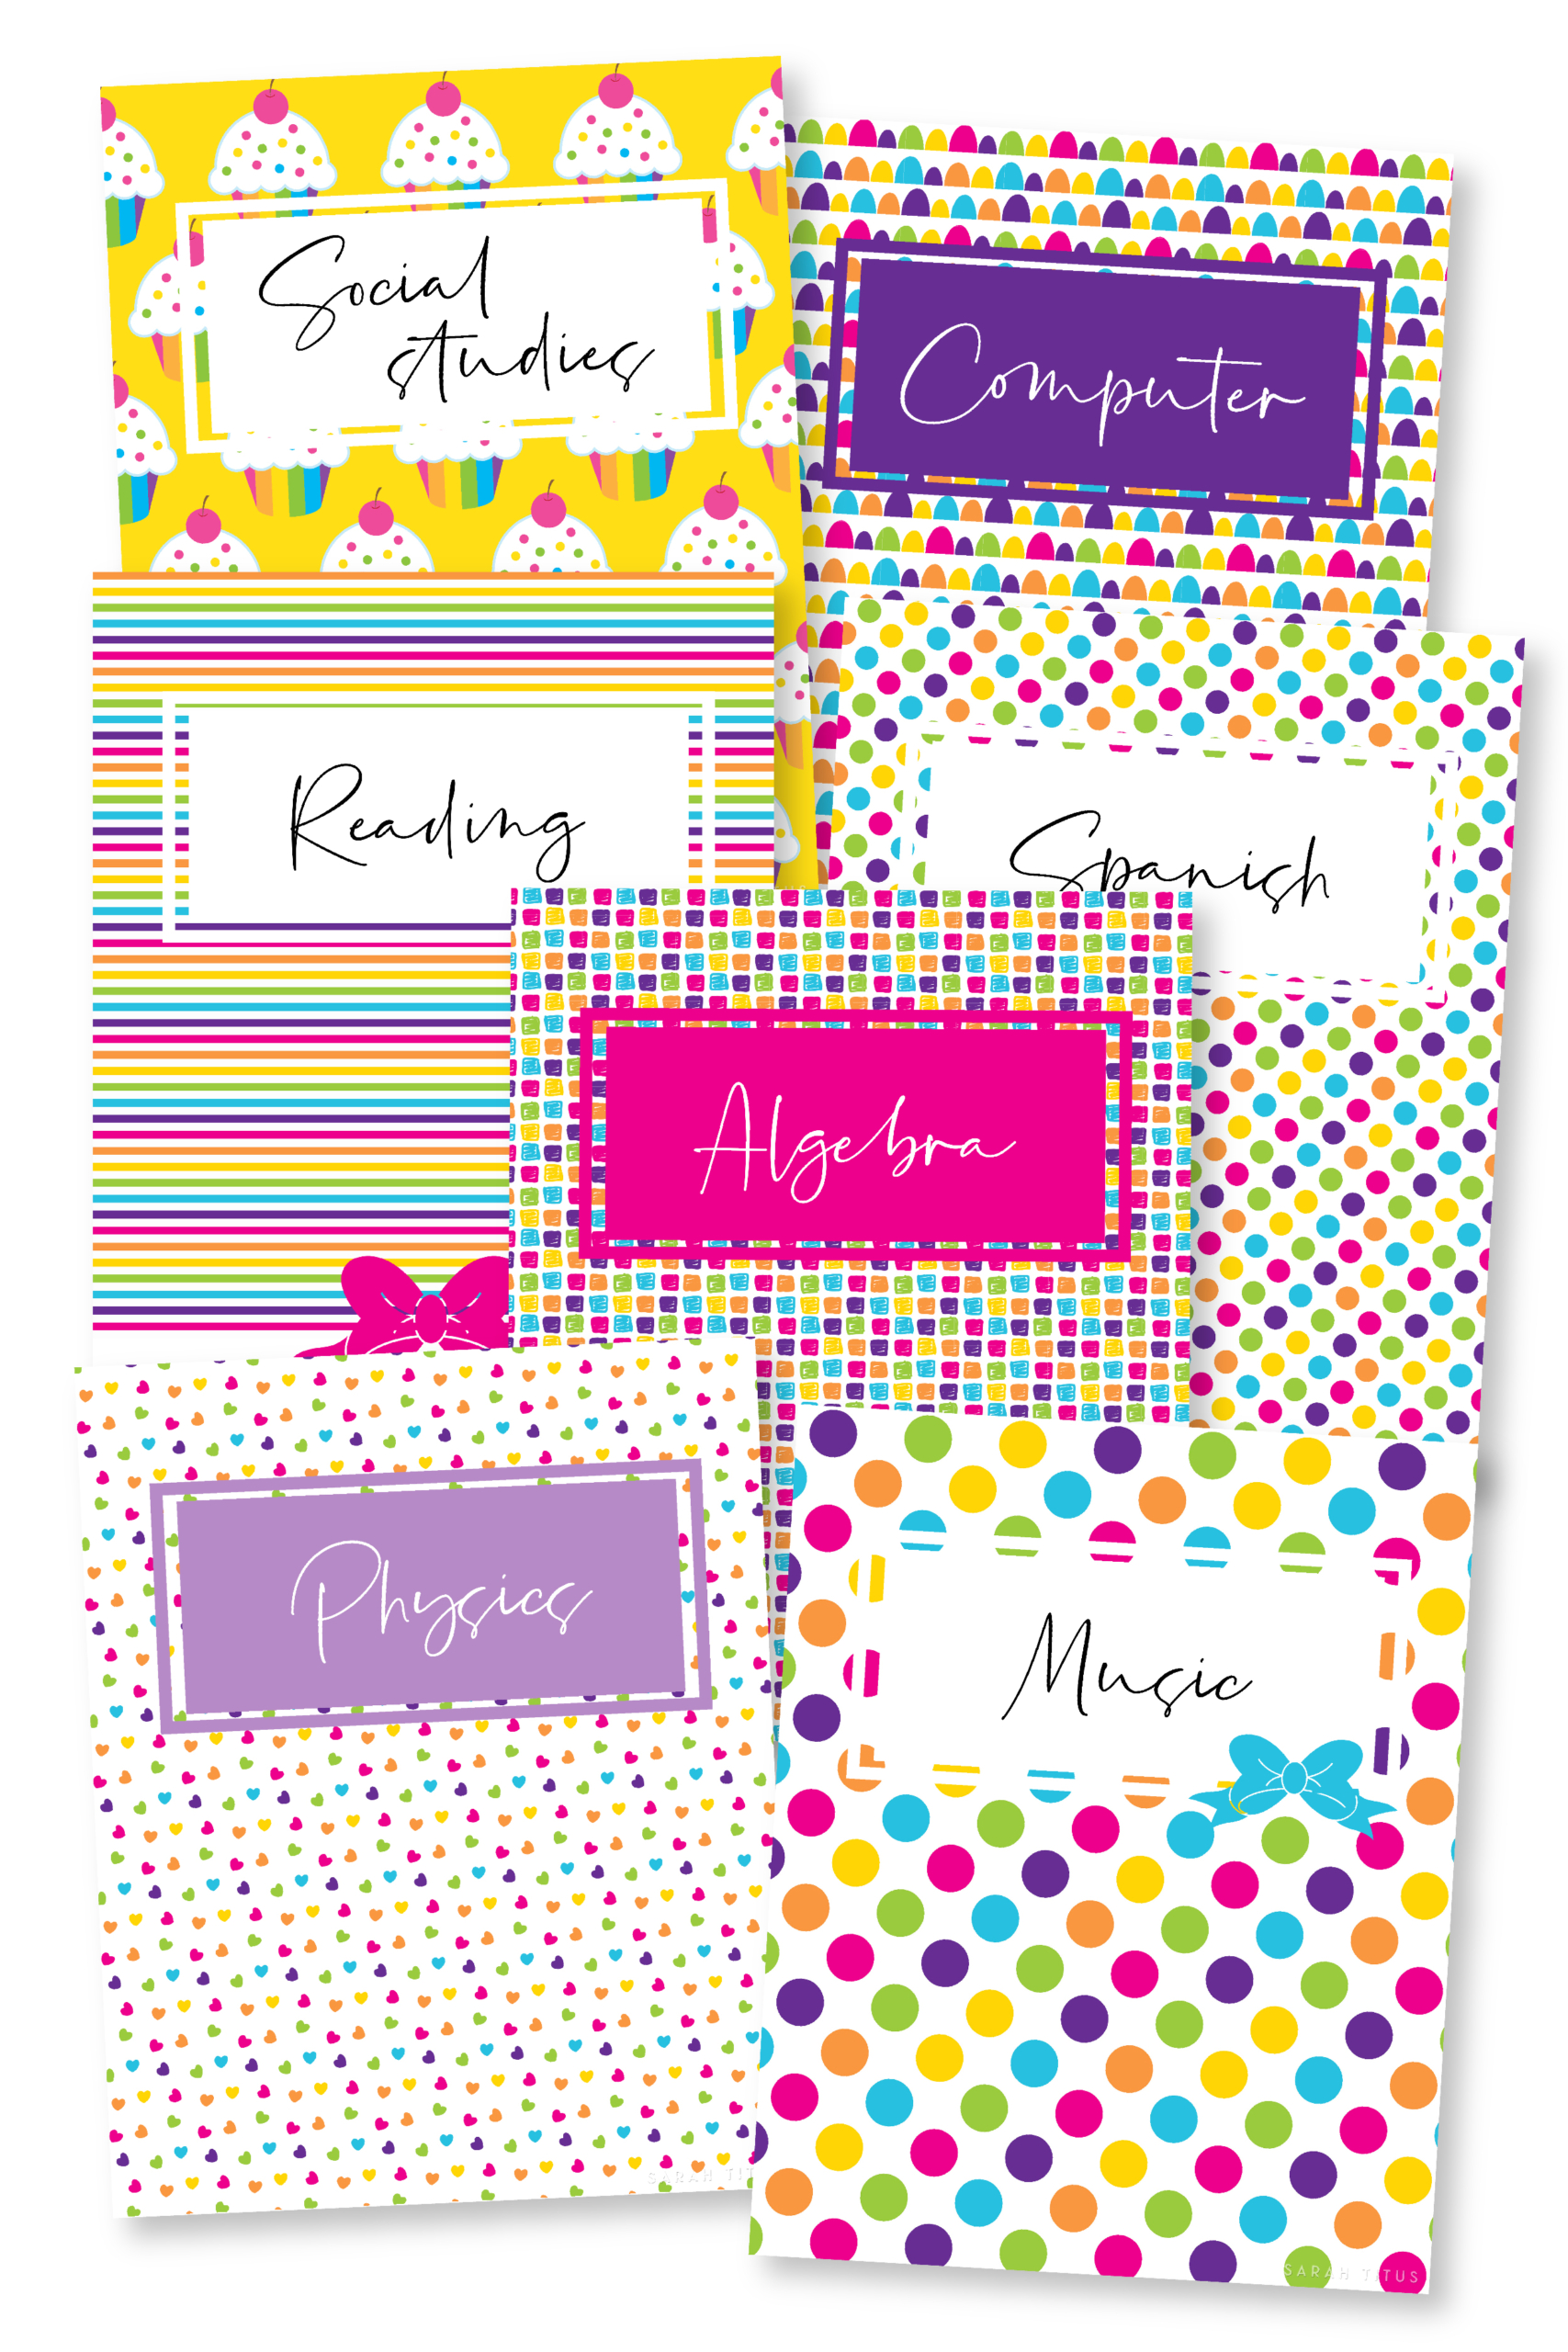 cute binder covers templates